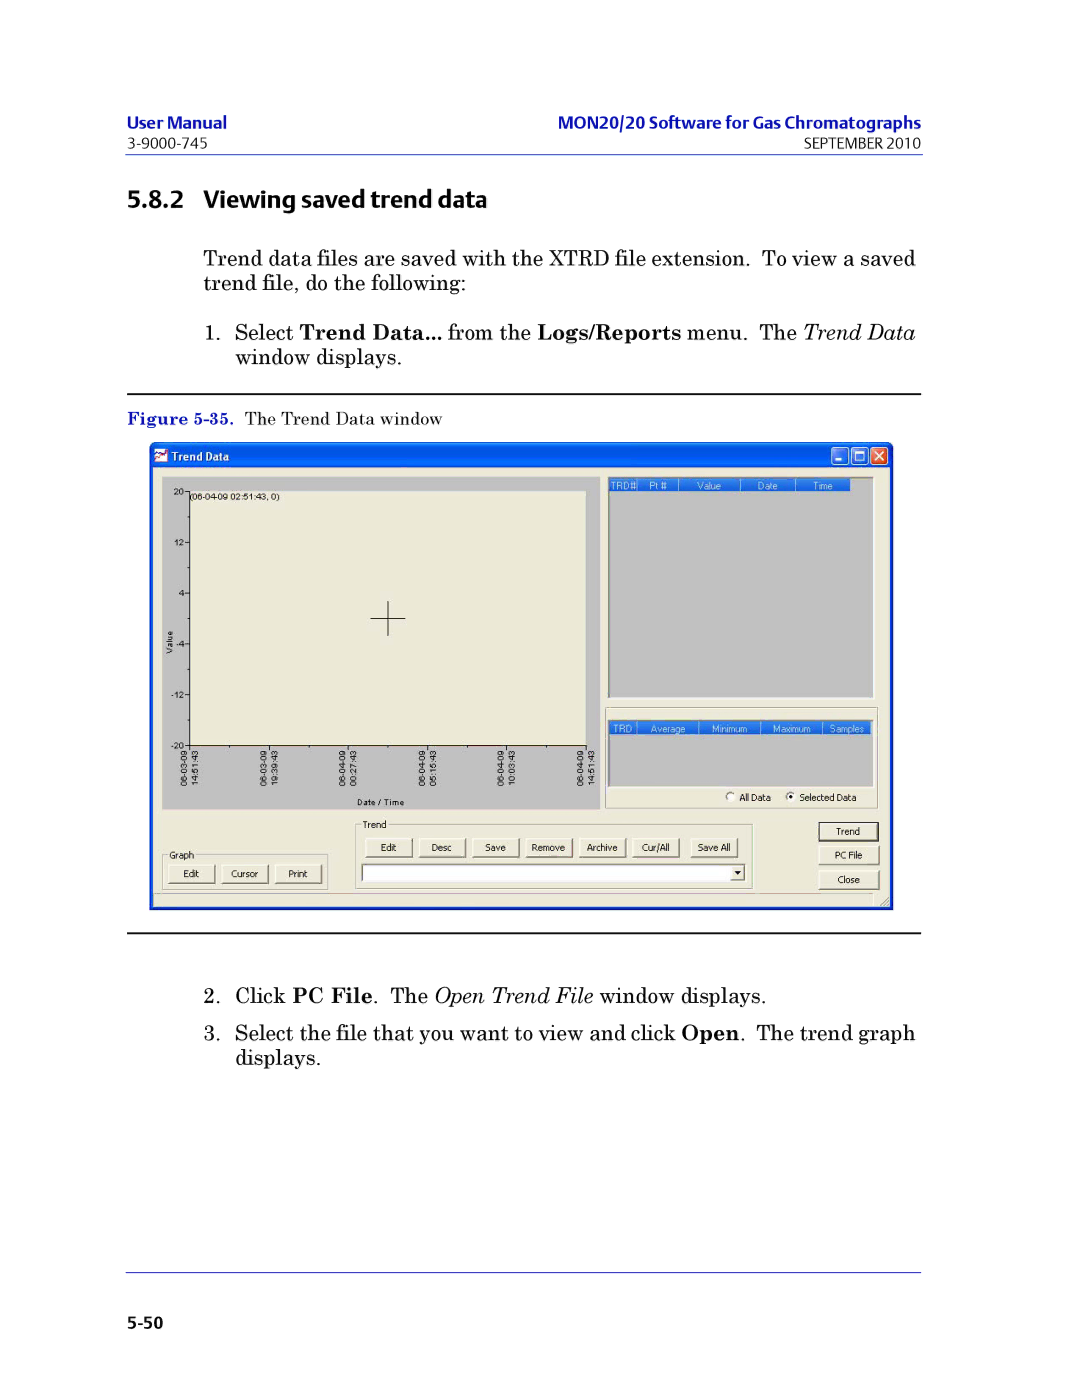 Emerson Process Management 3-9000-745 manual Viewing saved trend data, The Trend Data window 